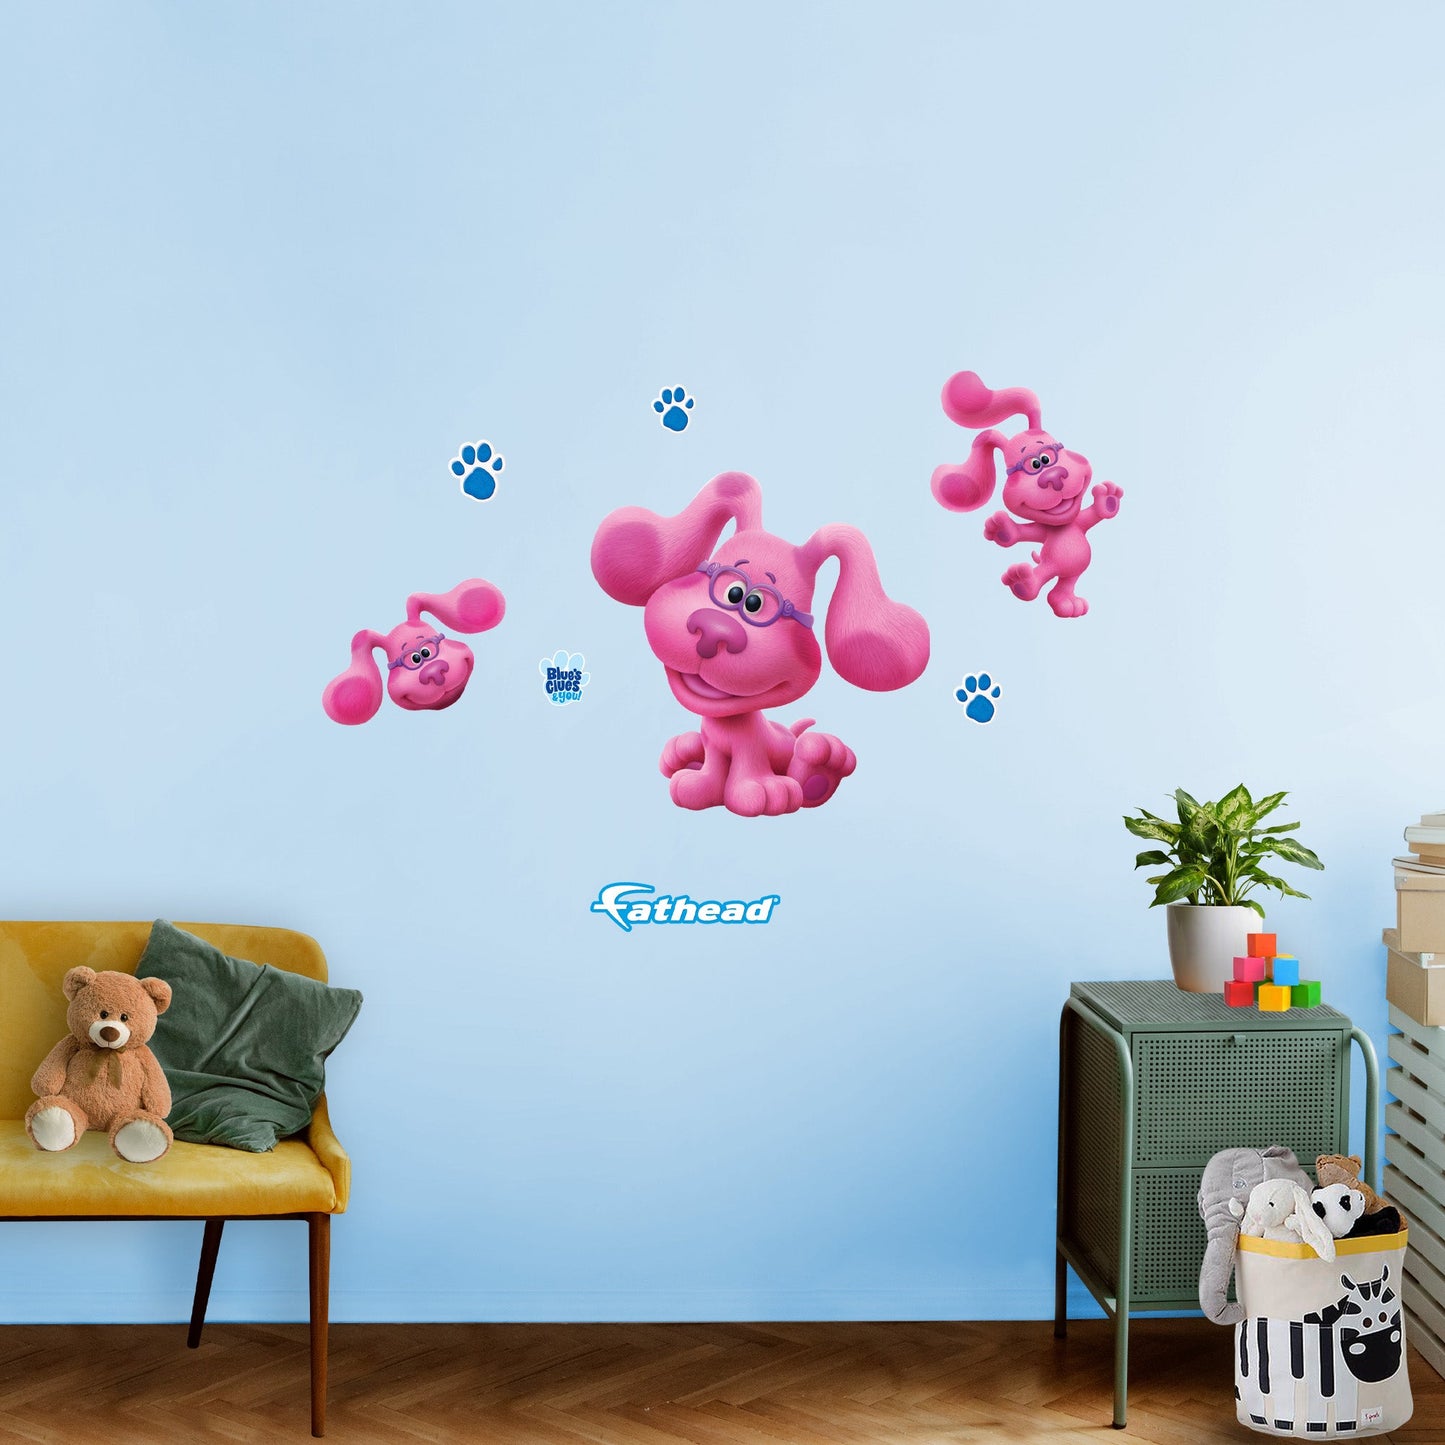 Blue's Clues: Magenta RealBigs - Officially Licensed Nickelodeon Removable Adhesive Decal